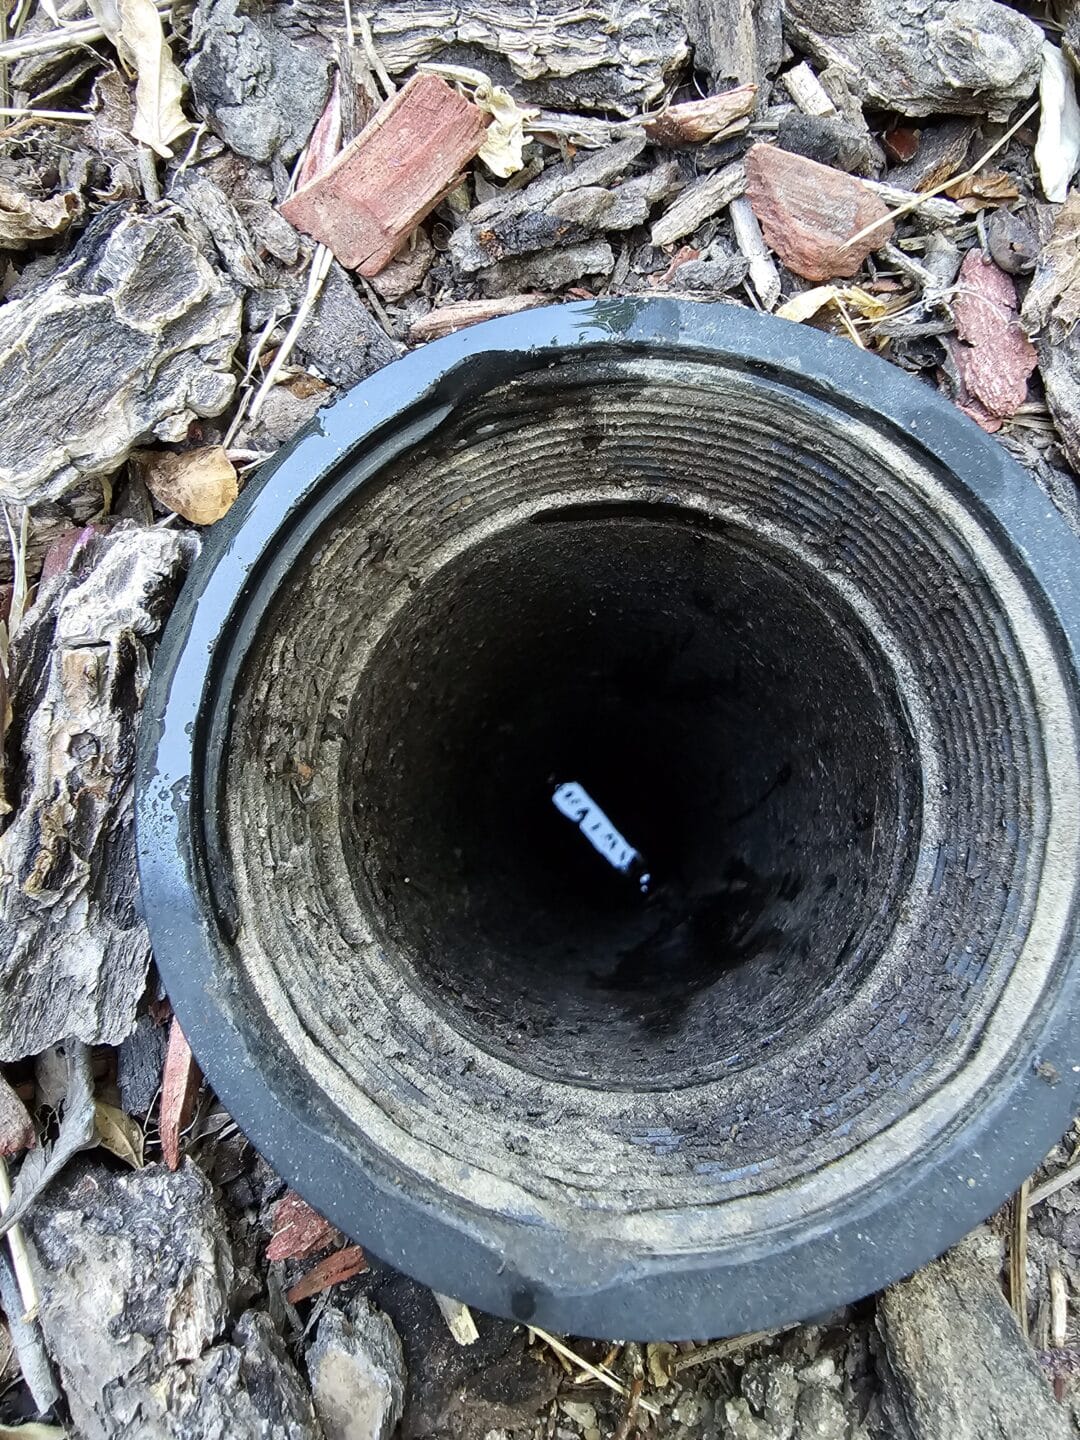 sewer scope inspections in orange county ca